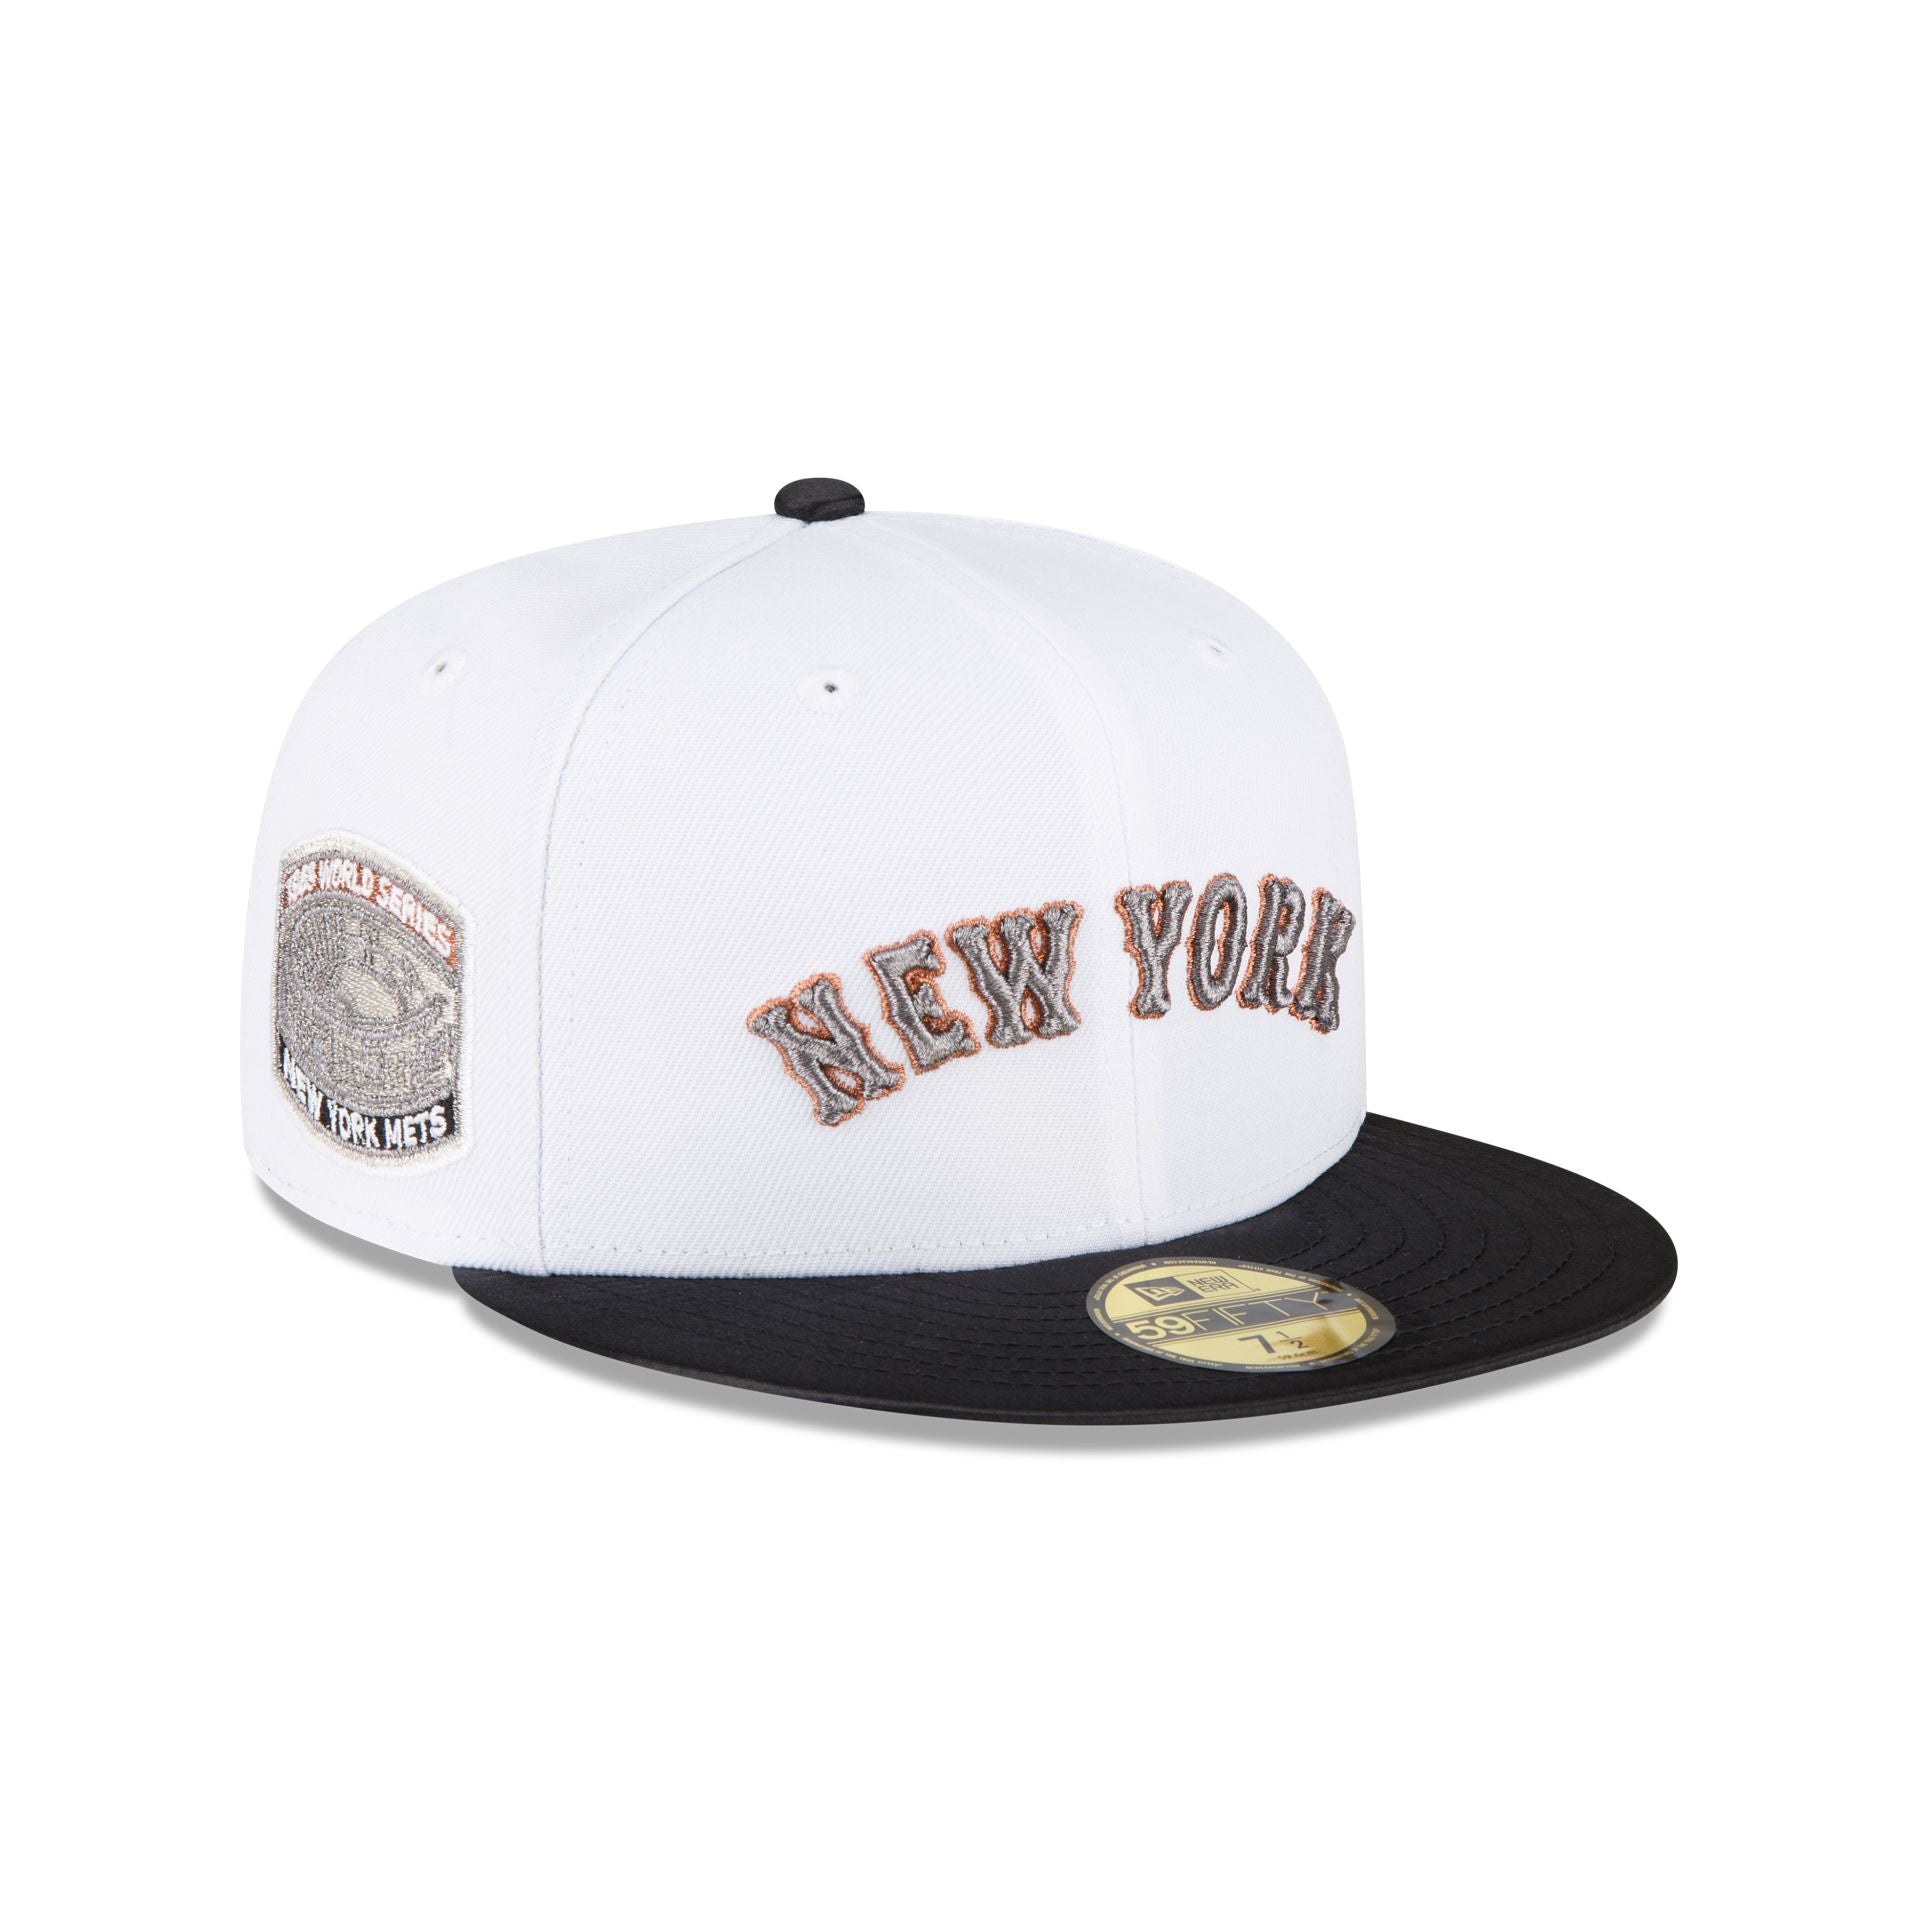 New York Mets New Era Optic 59FIFTY Fitted Hat - White/Black